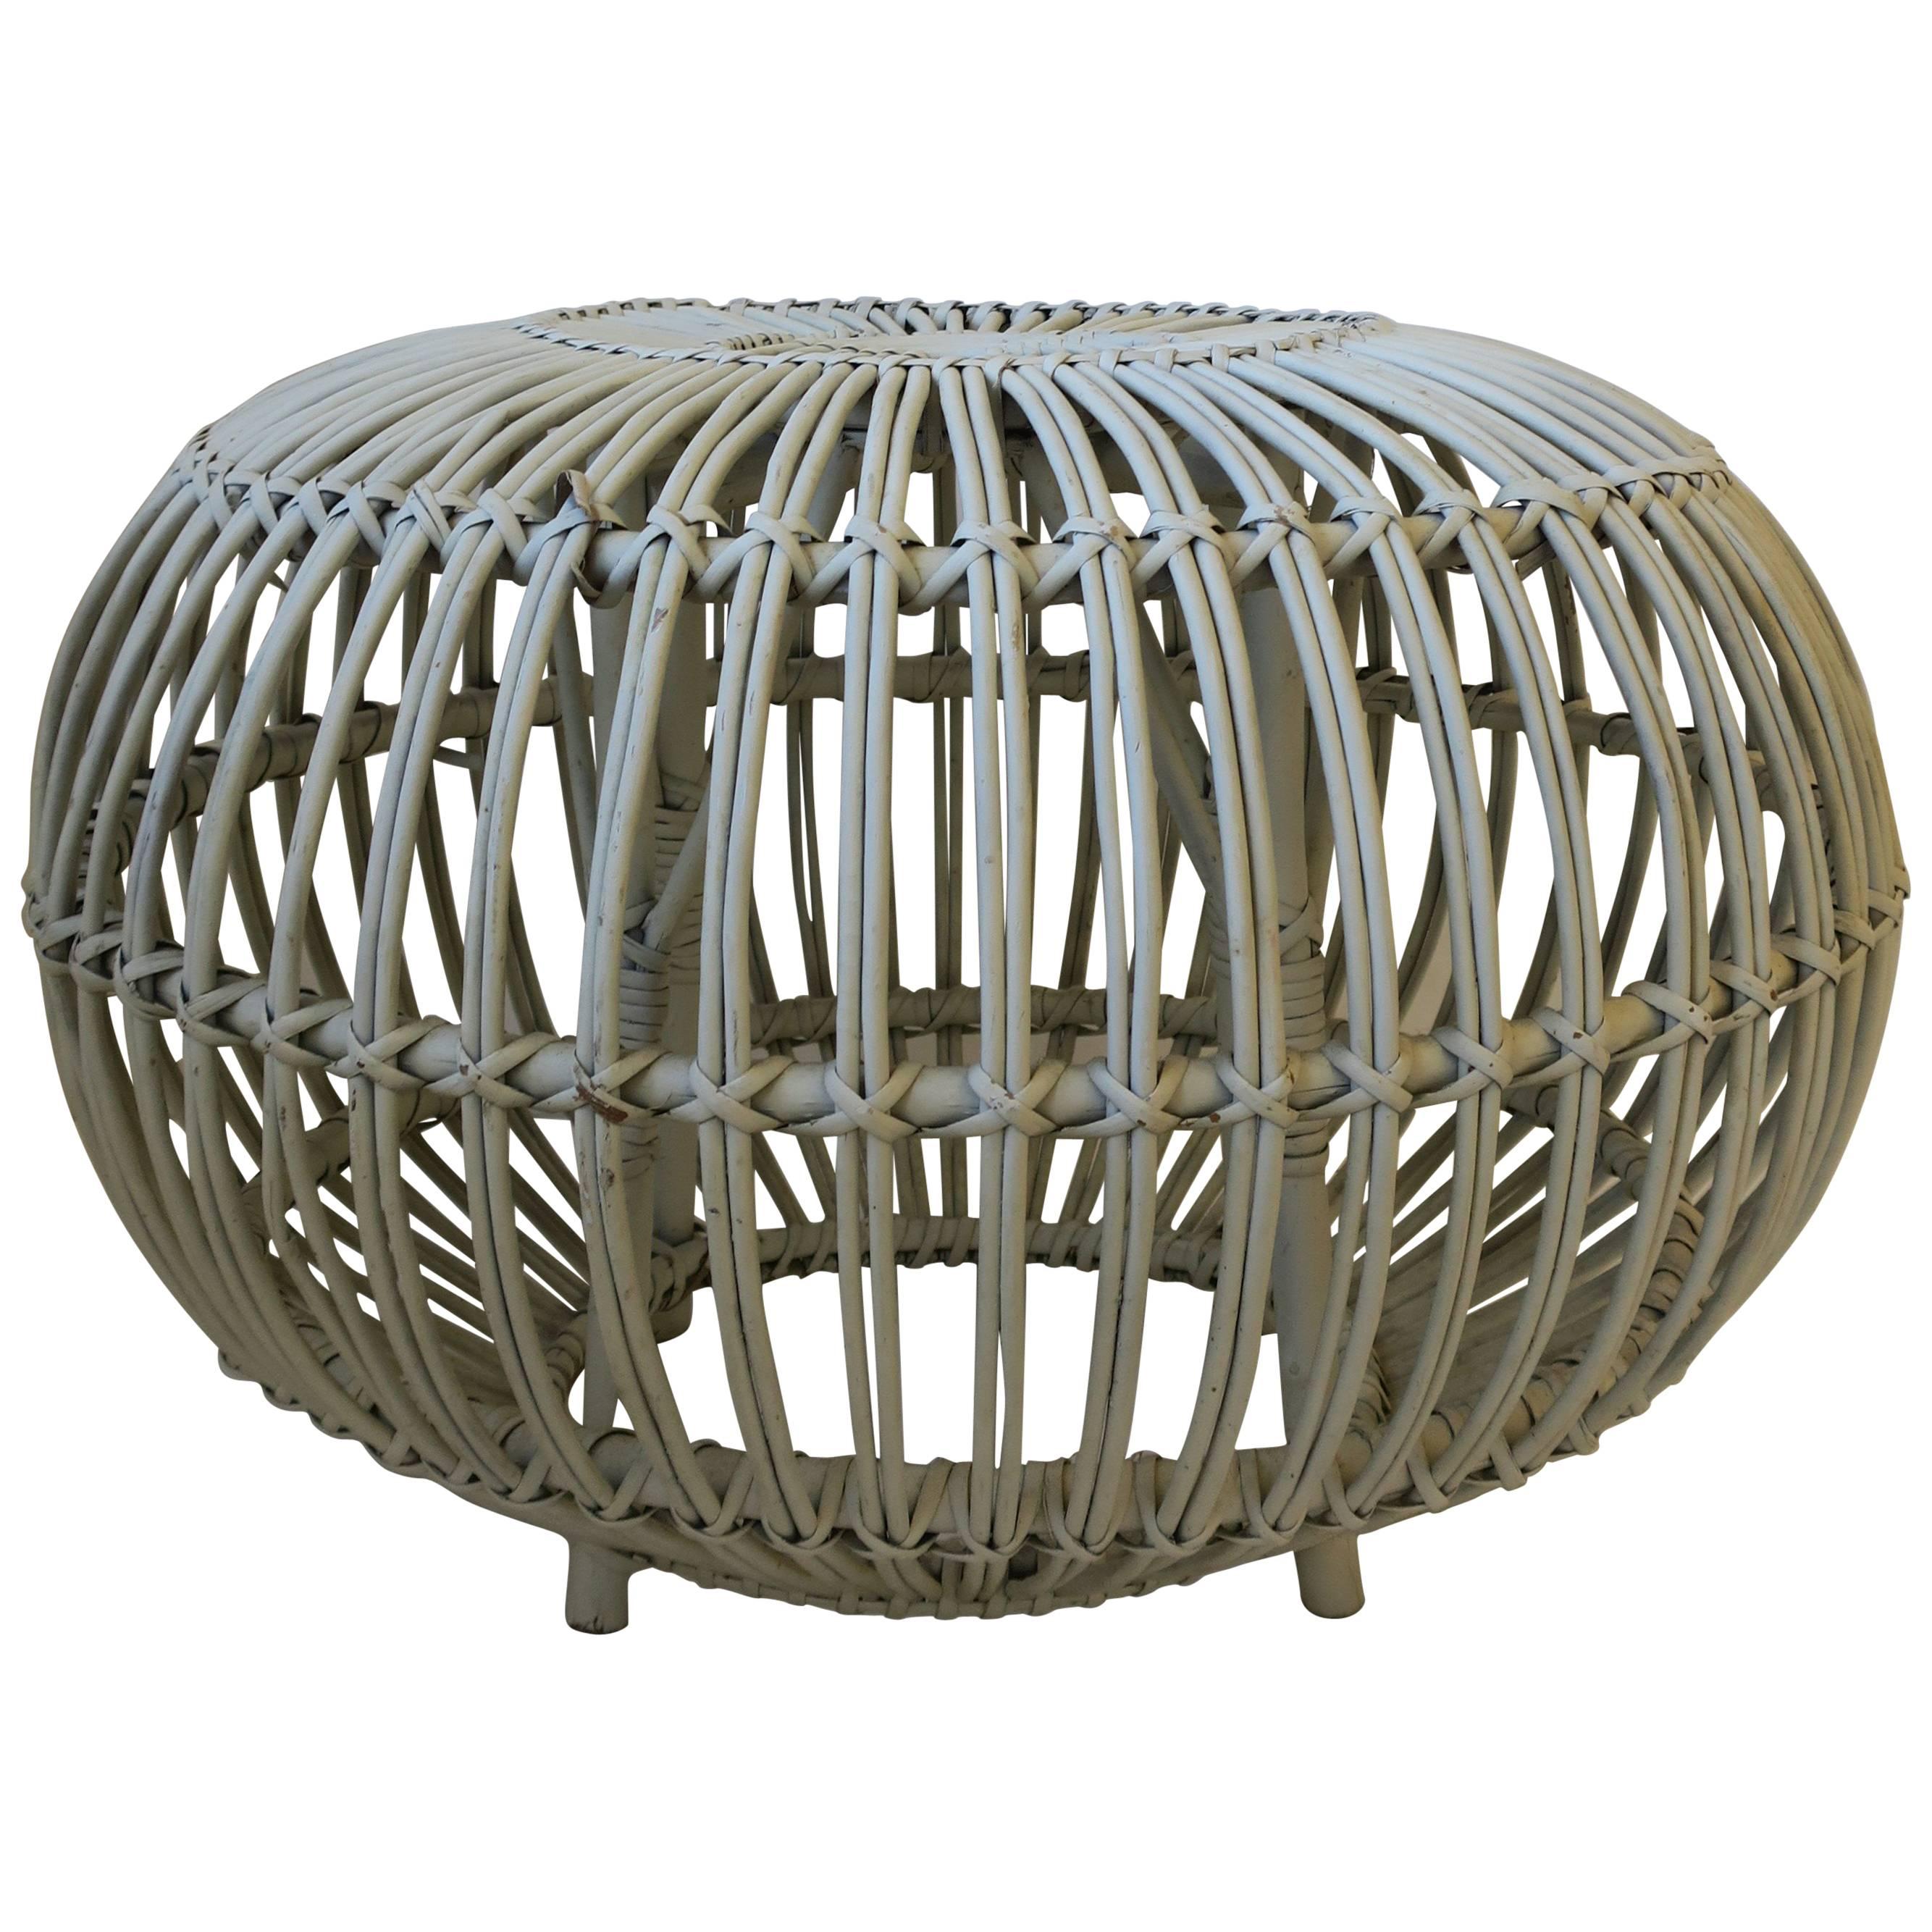 Midcentury Round White Rattan Stool or Side Table by Franco Albini